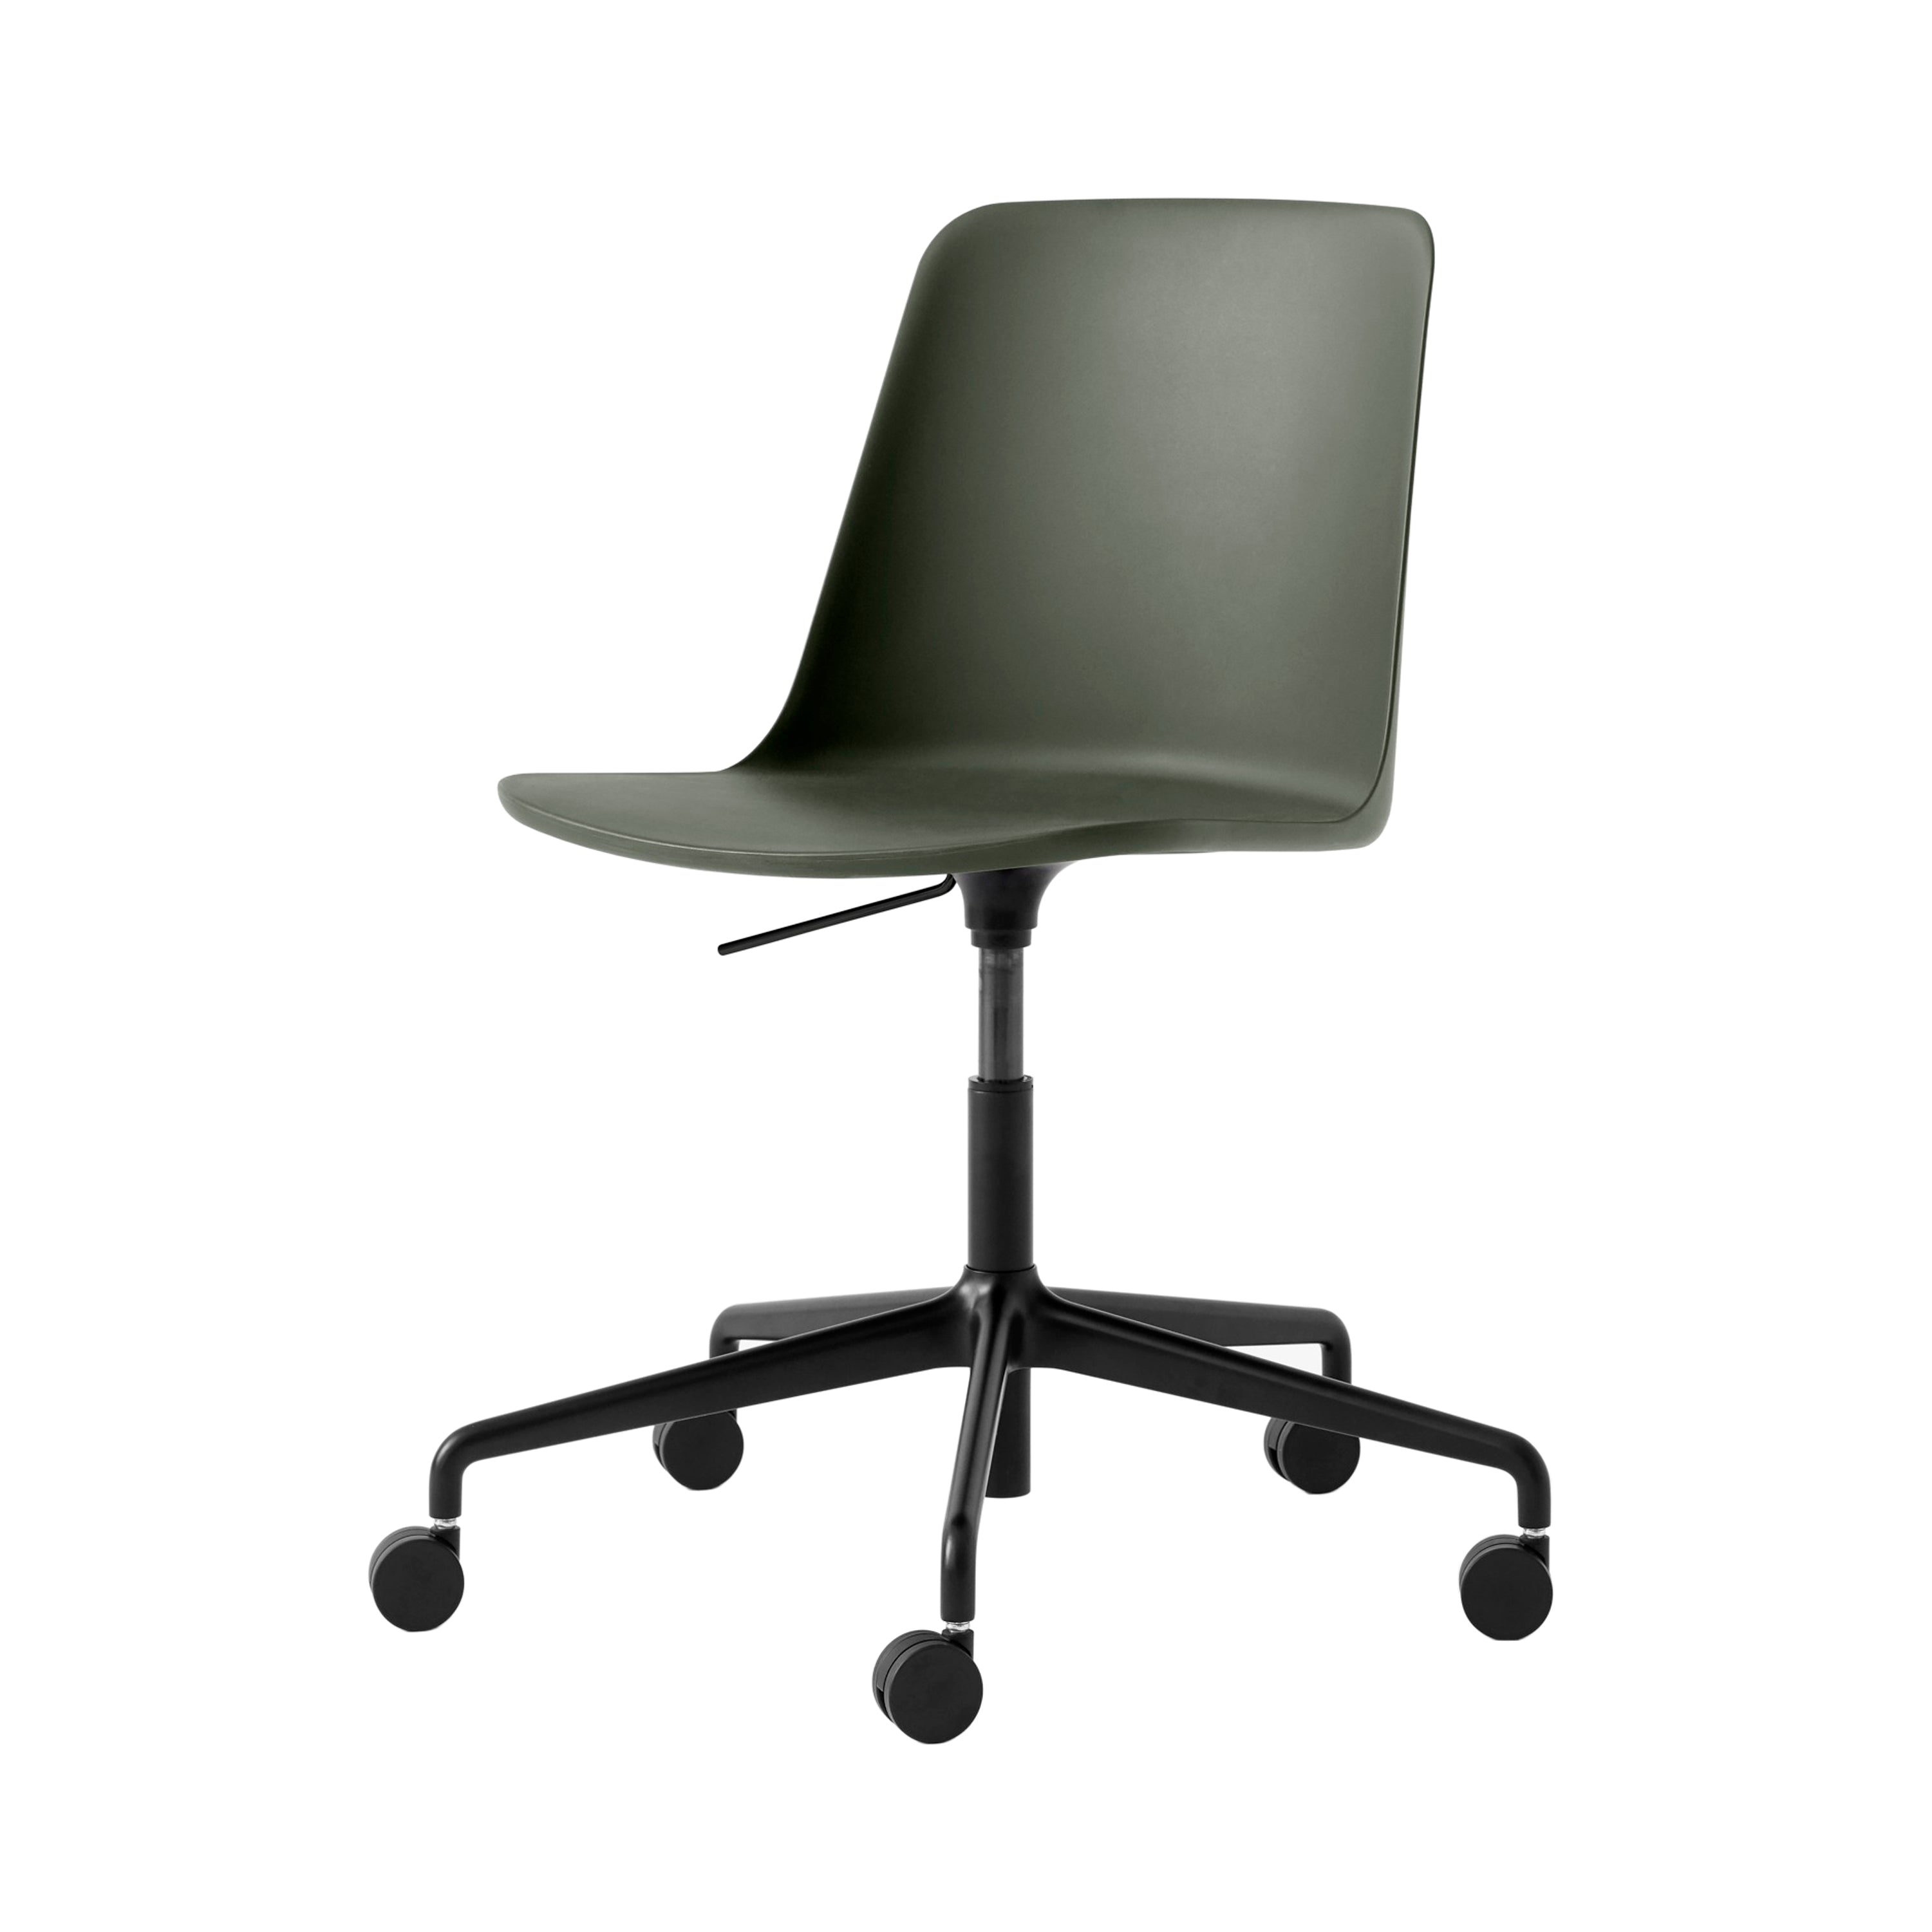 Rely Chair HW28: Bronze Green + Black